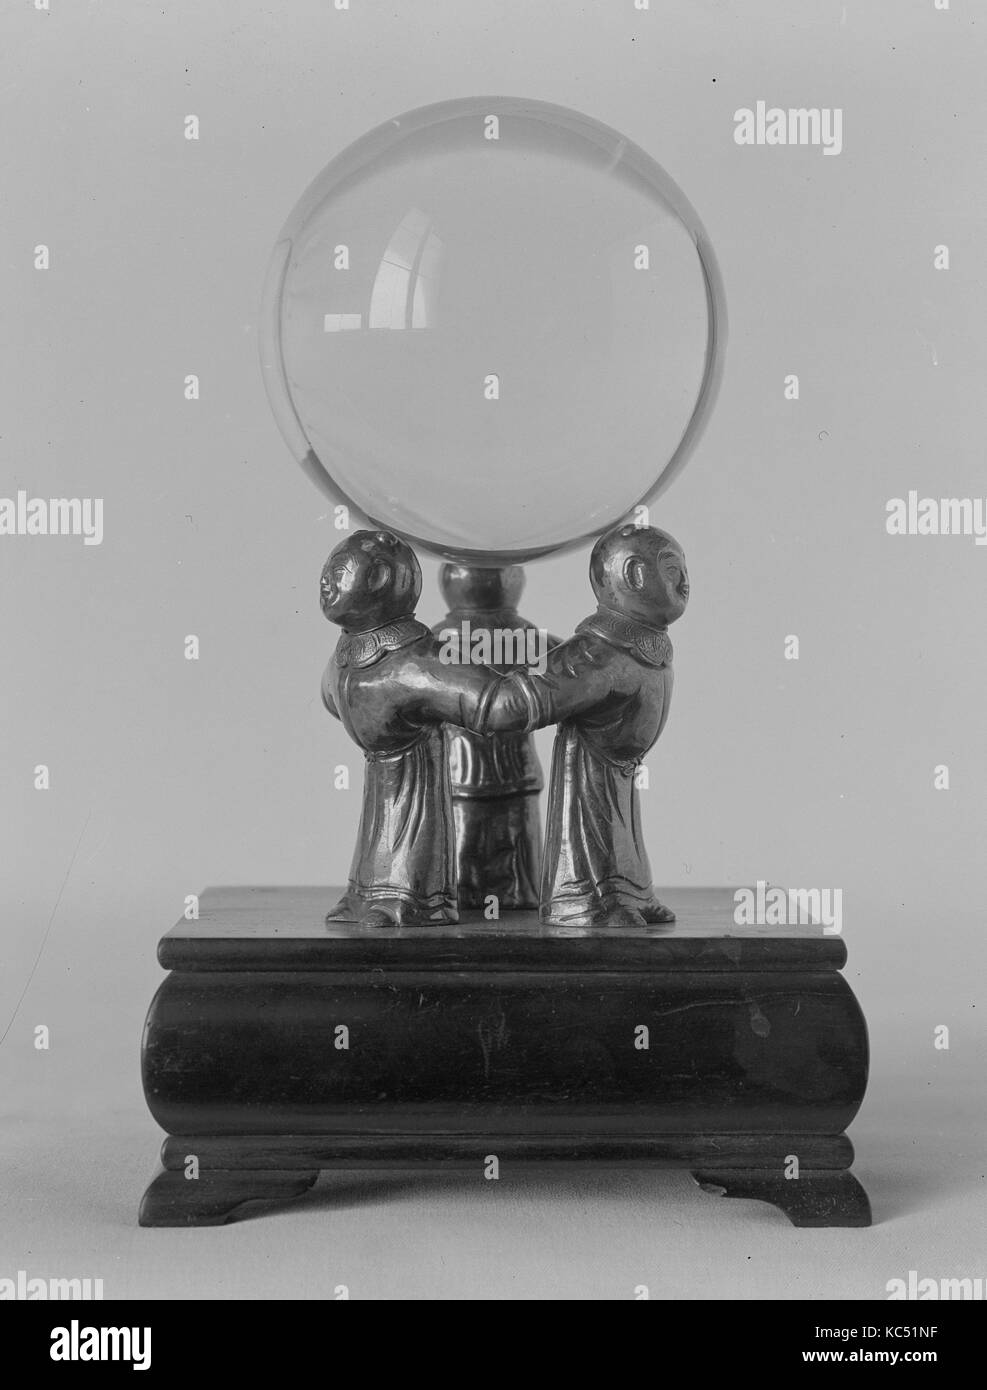 Crystal Ball on a Silver Stand composed of Three Figures, 18th century Stock Photo